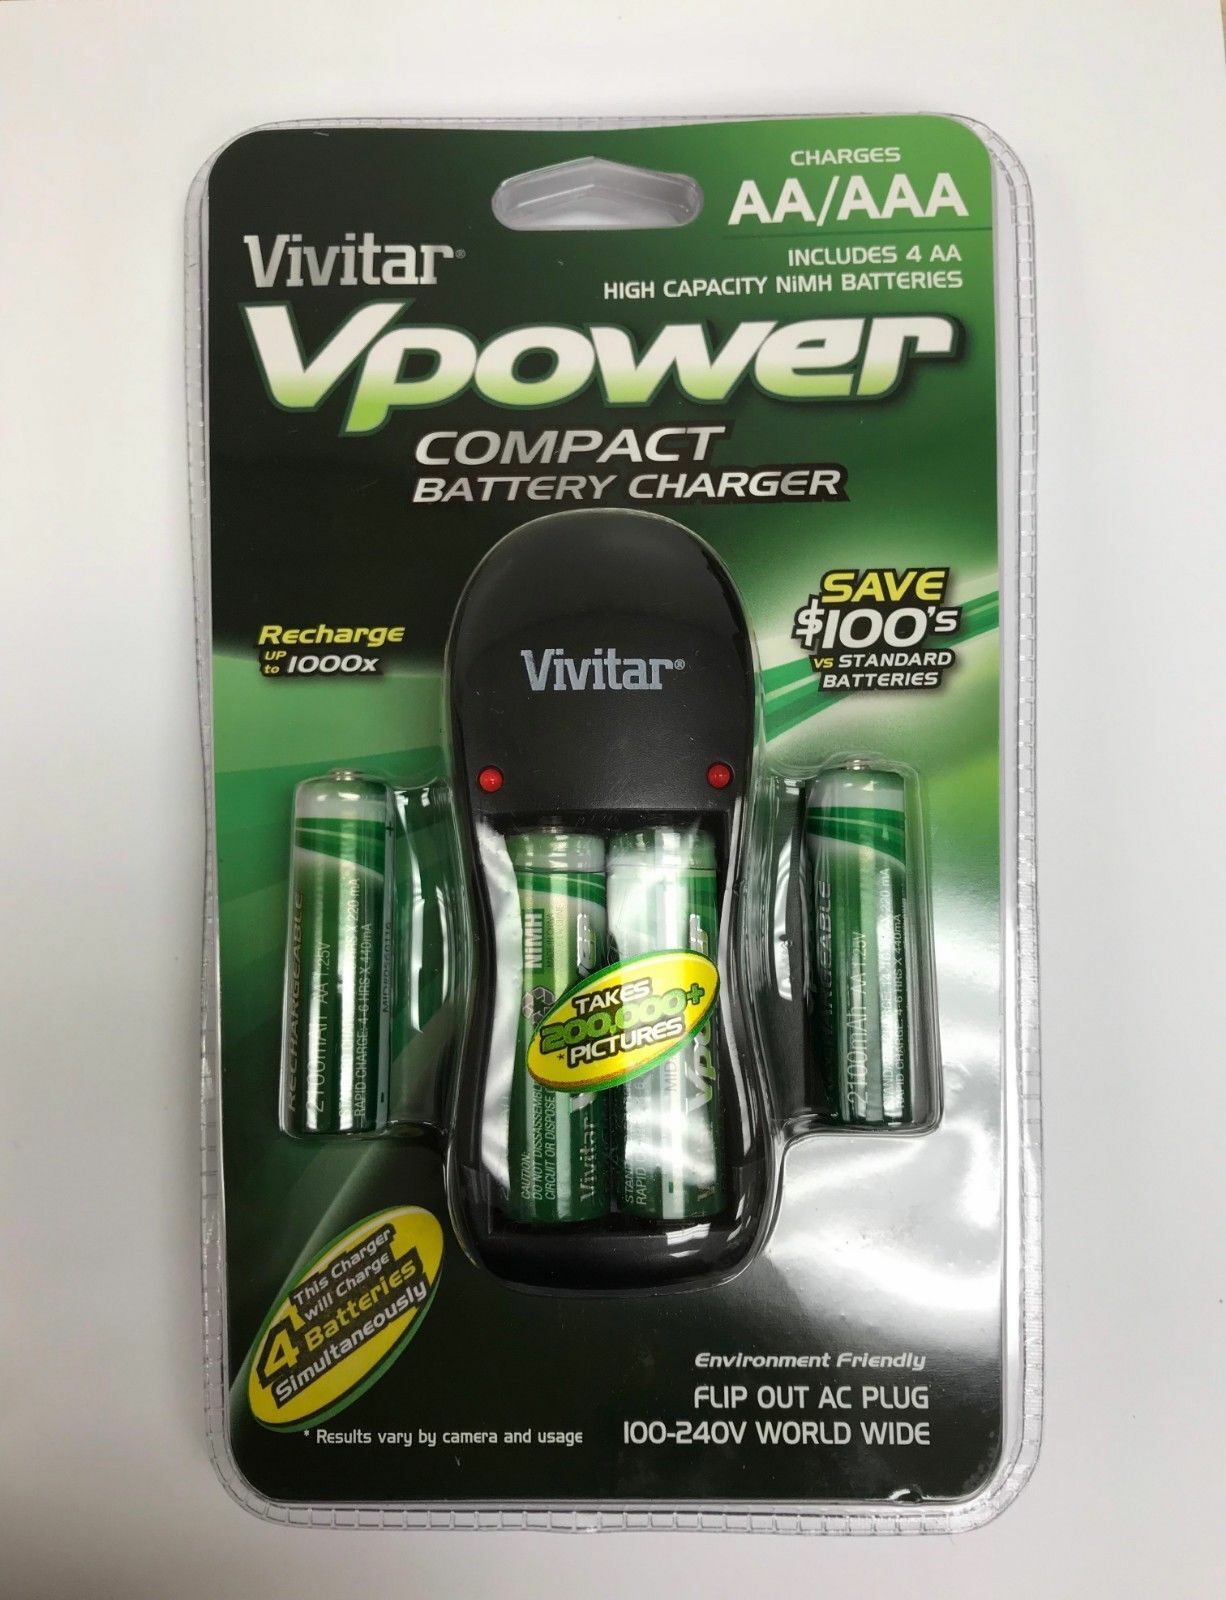 NEW NIB Vivitar Vpower Compact Wholesale Battery BC-1 4 latest W Charger Btty AA